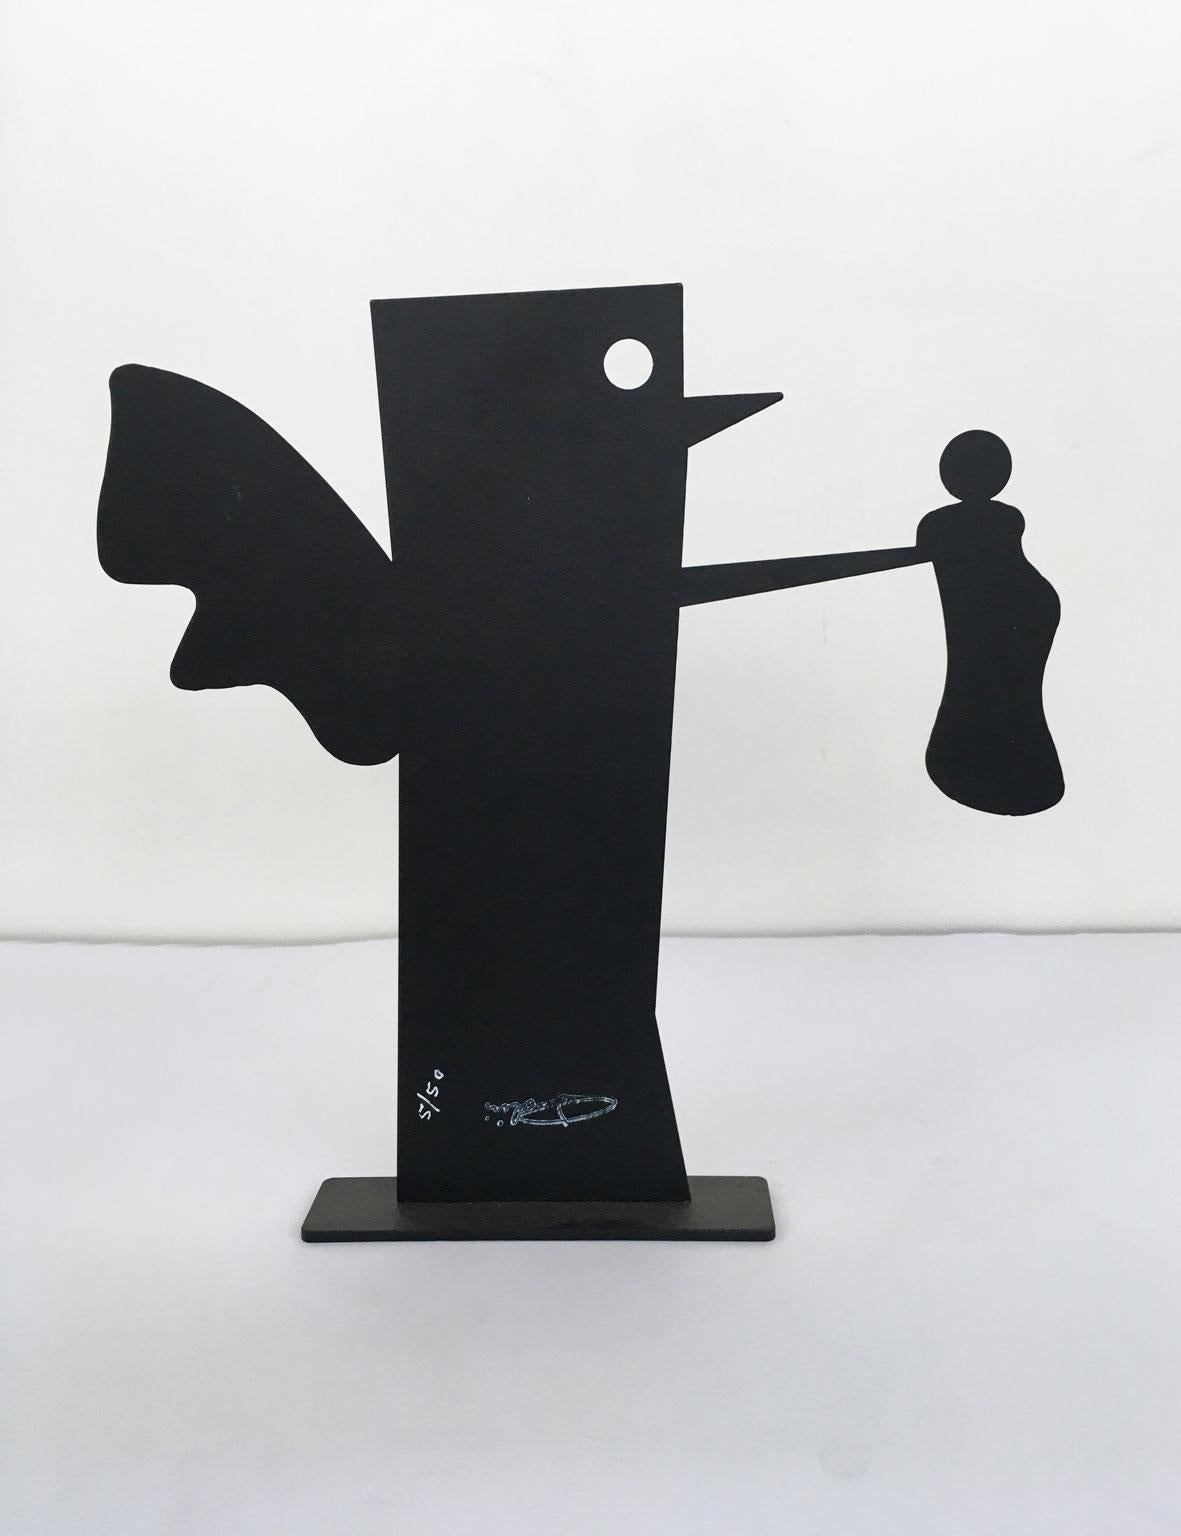 Italy 1980 Riccardo Dalisi Black Metal Painted Sculpture Caffellatte For Sale 5